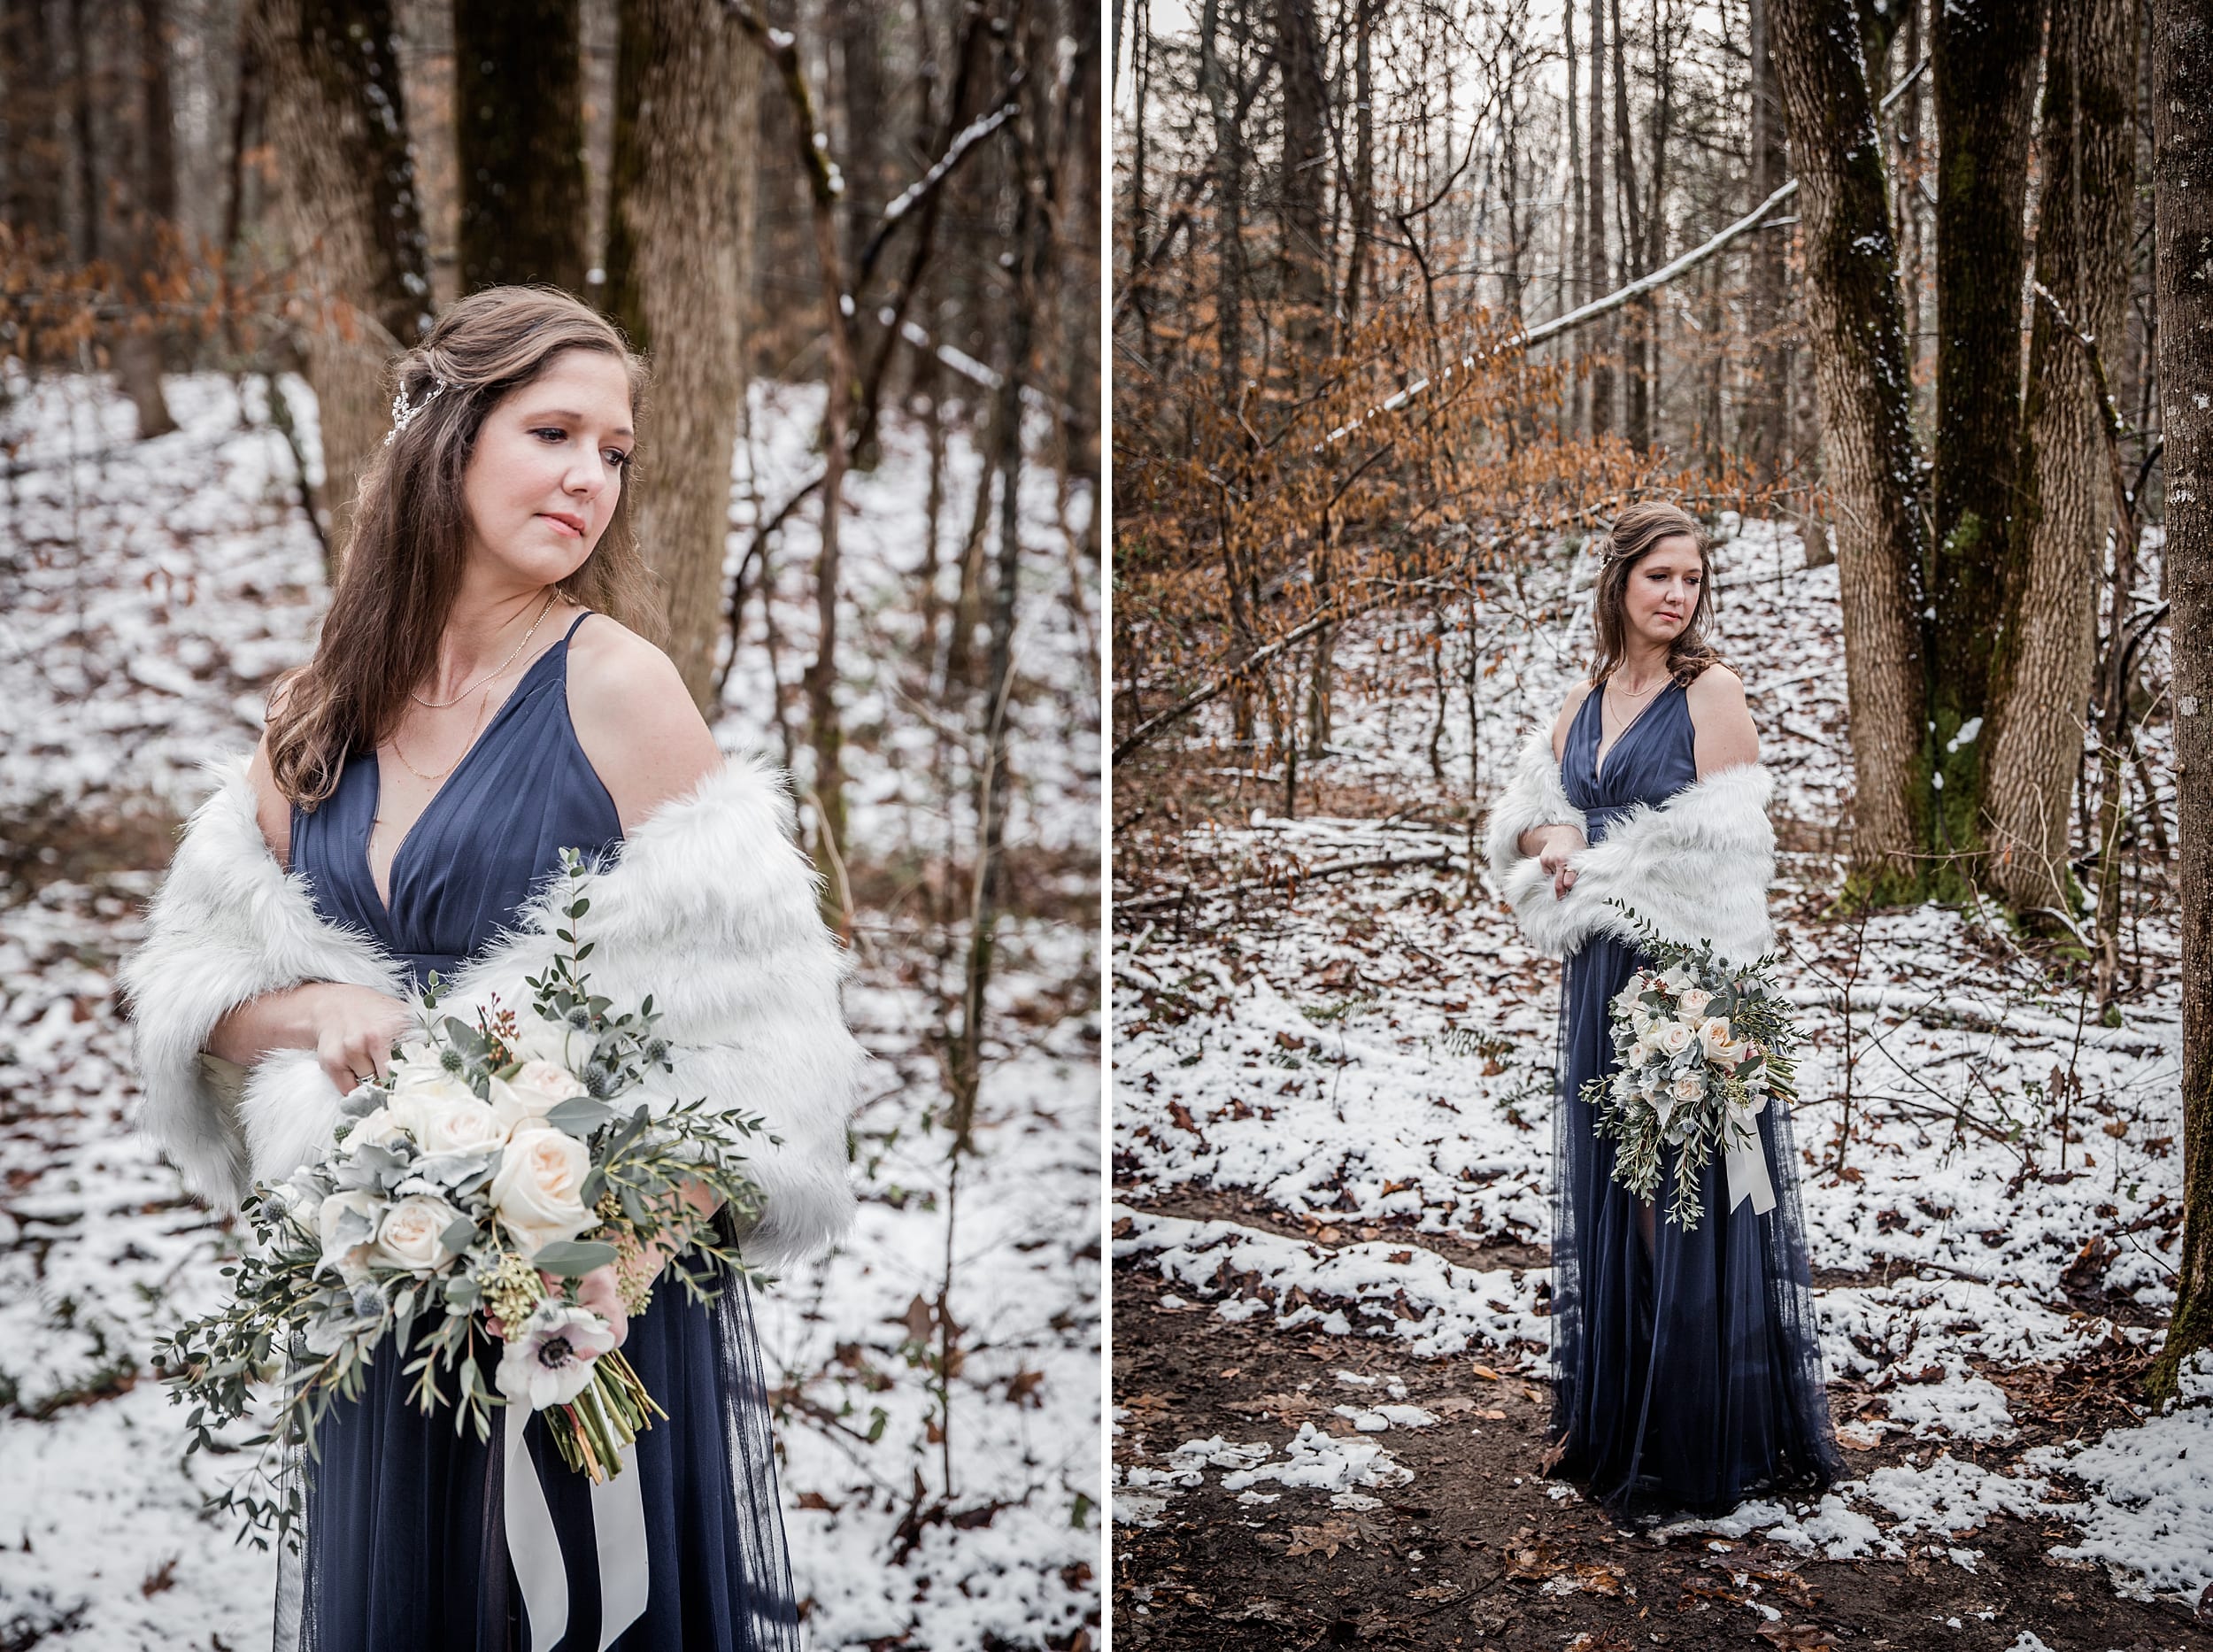 Bride holding bouquet in snow